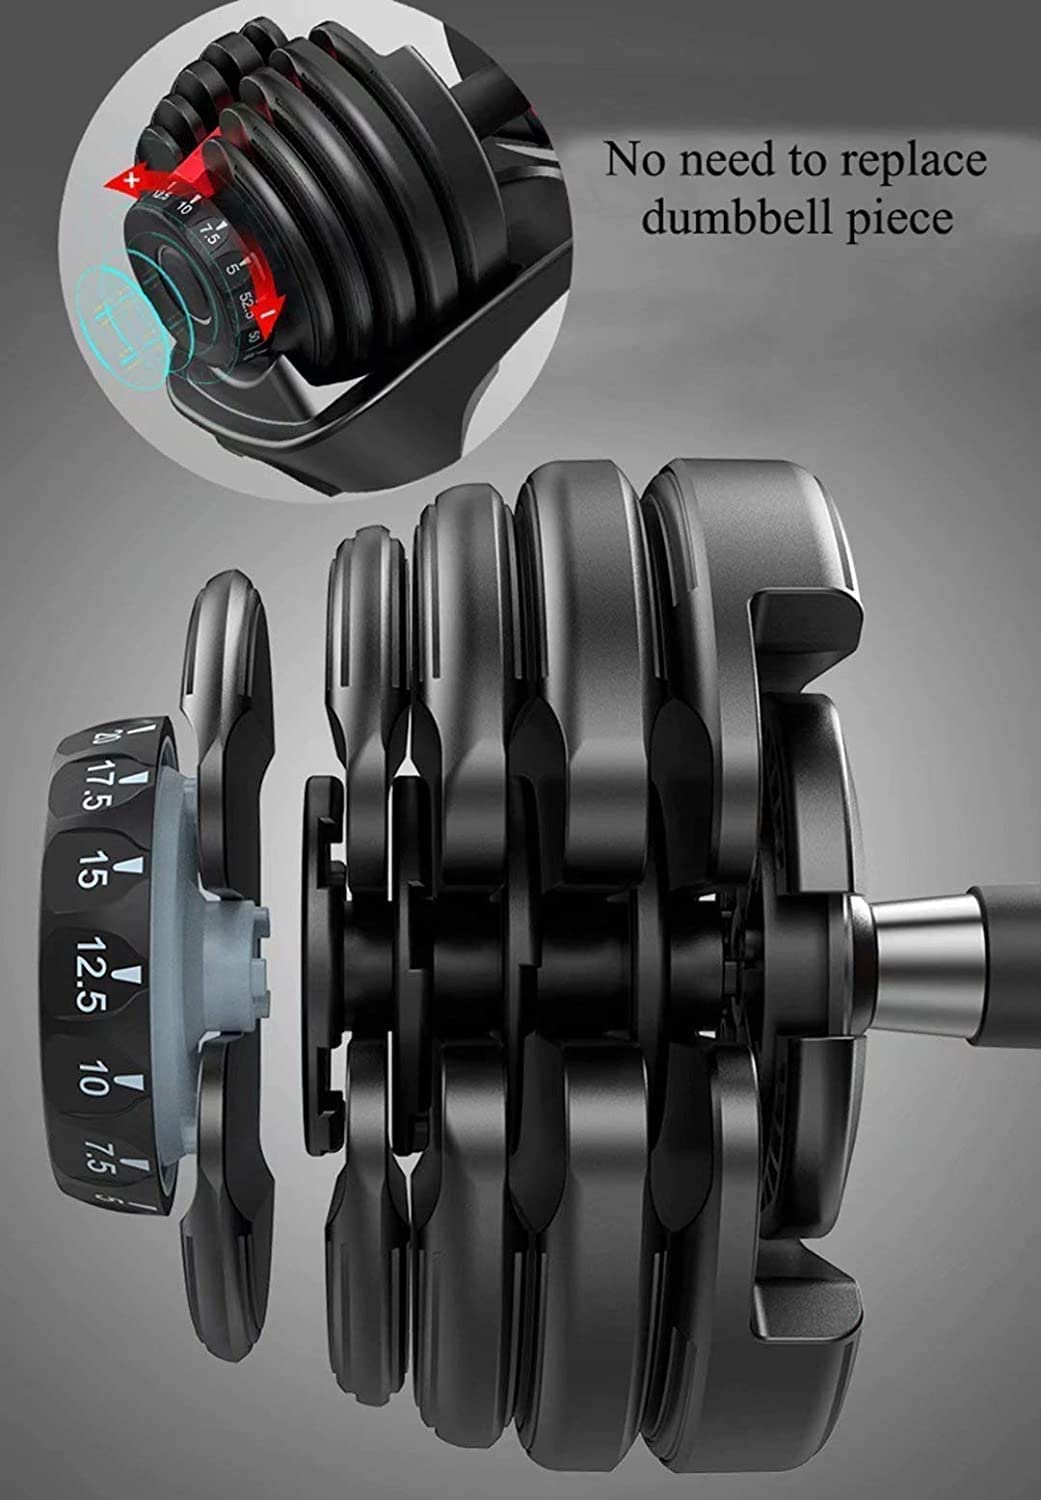 2 x 24kg Adjustable Dumbbell Weight Fitness Home GYM Exercise Equipment